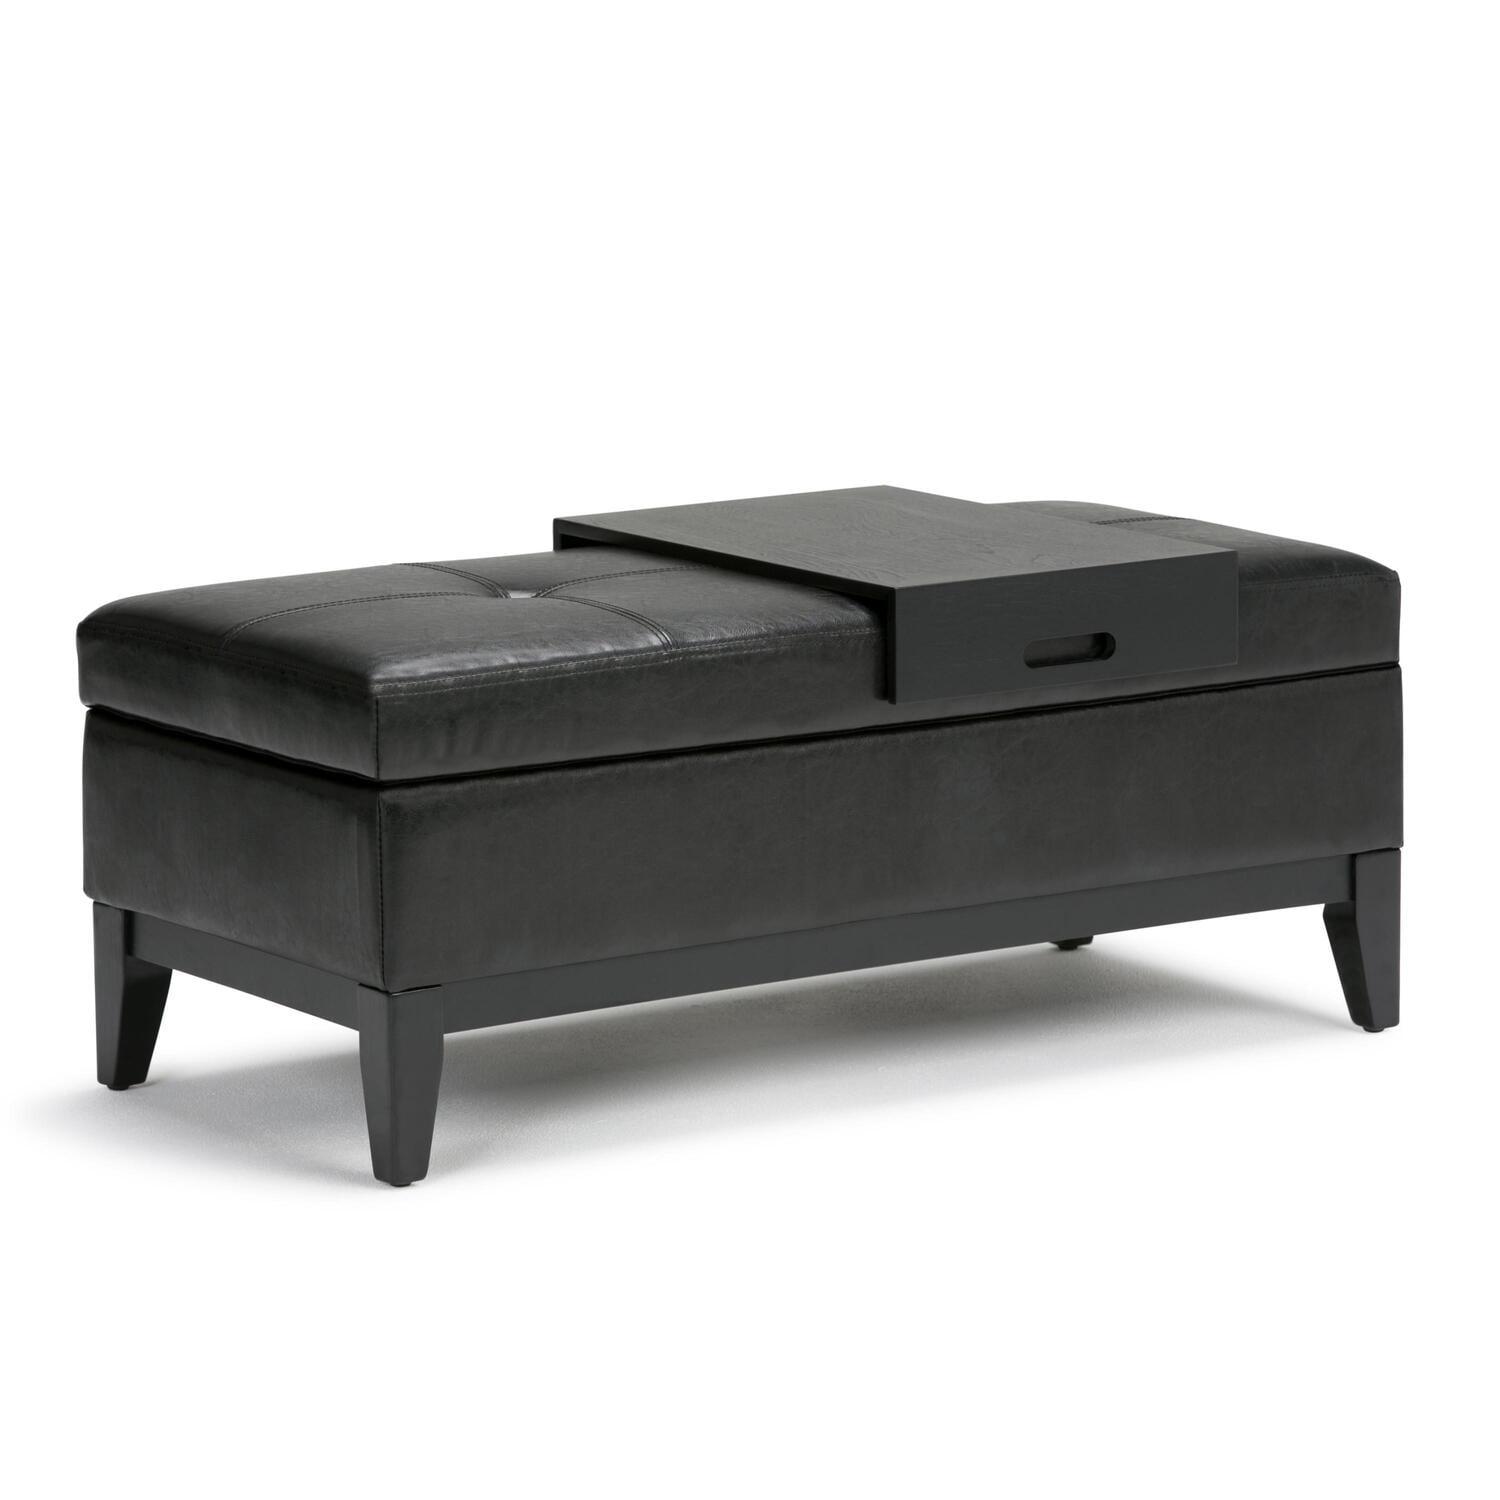 Midnight Black Tufted Faux Leather Cocktail Ottoman with Tray & Storage